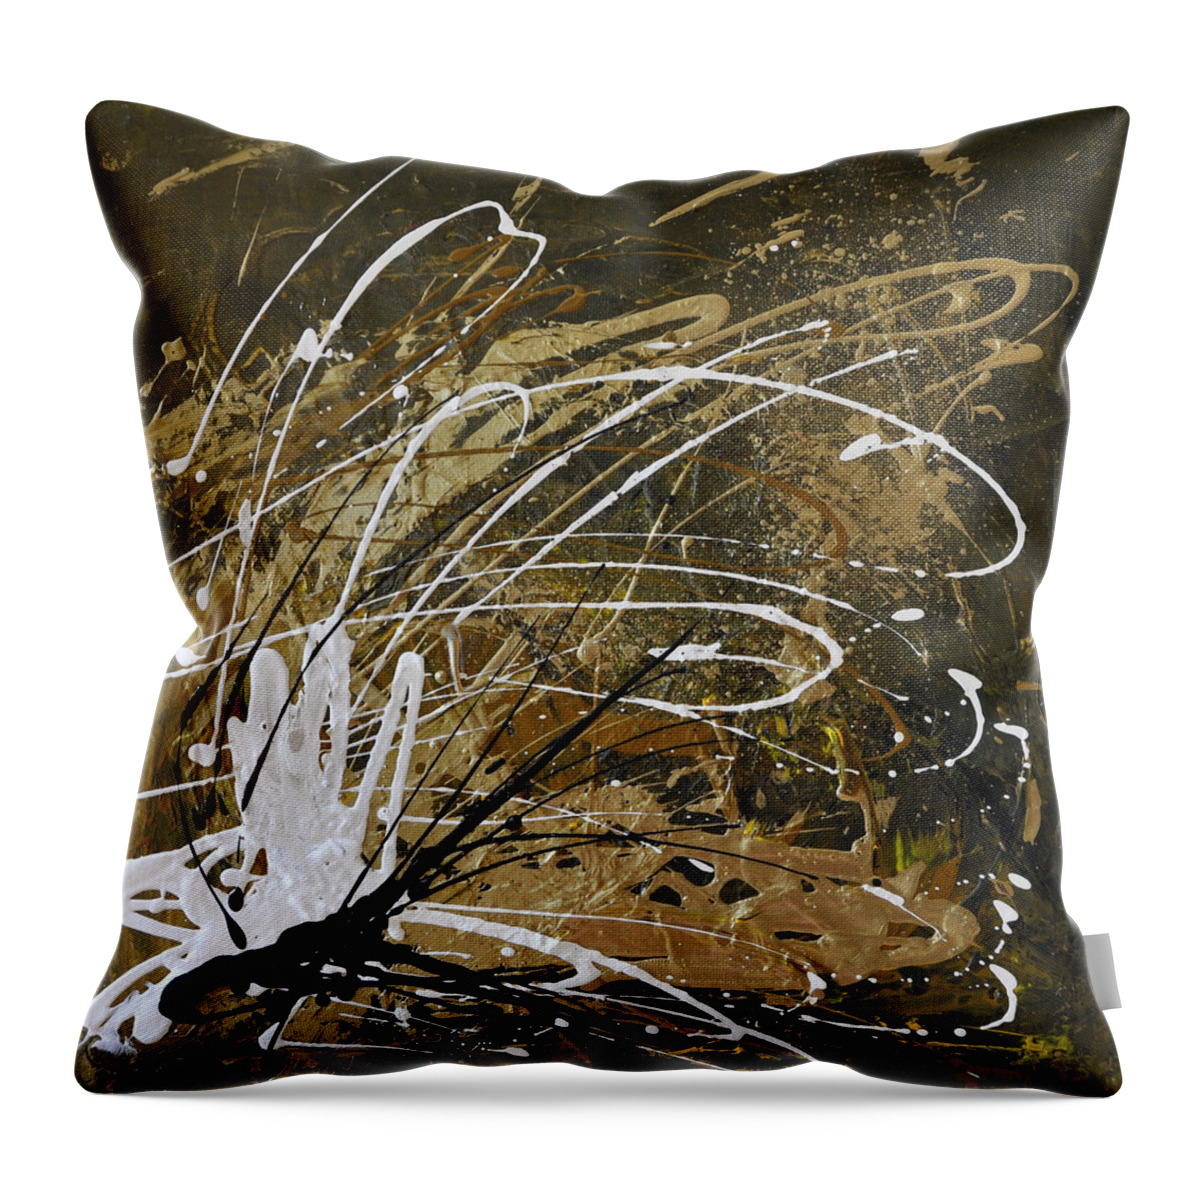 Sonal Raje Throw Pillow featuring the painting Fiesta 2 by Sonal Raje